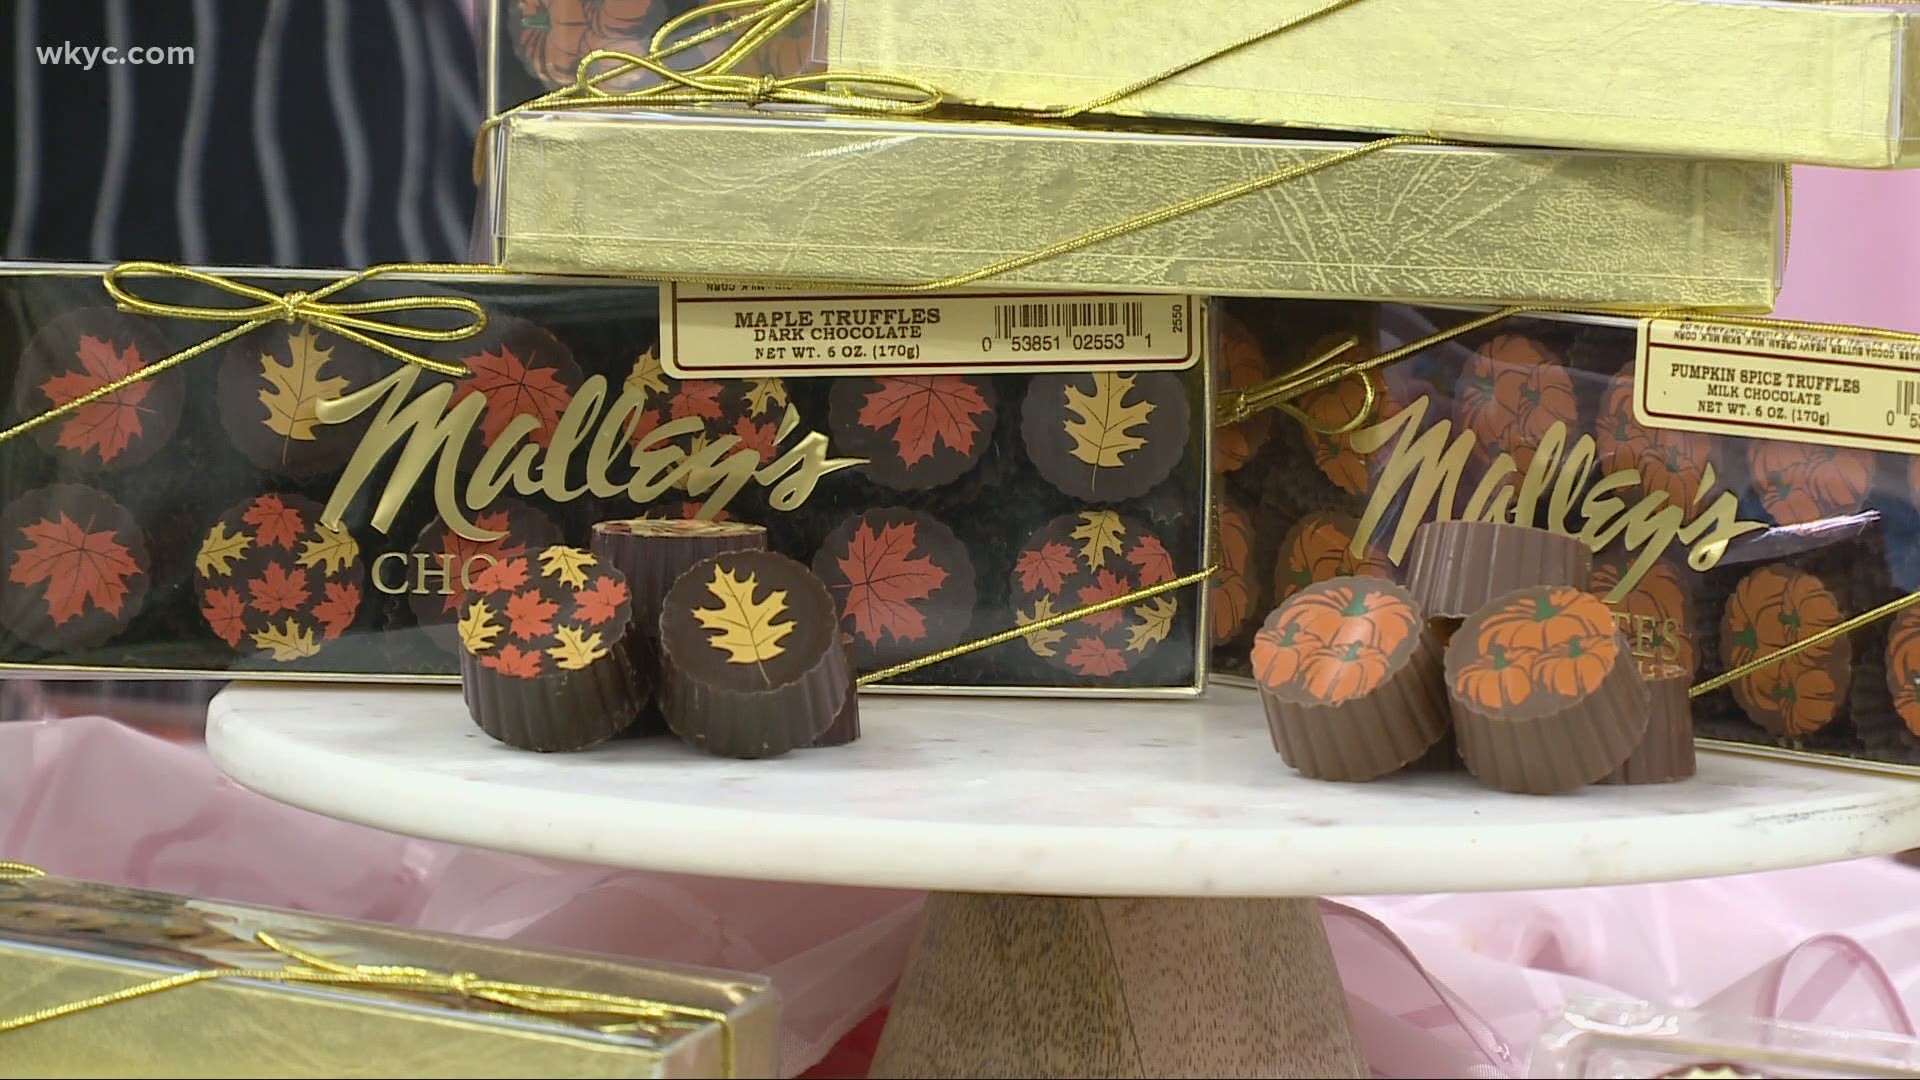 Can Malley's Chocolates require employees to get vaccinated?